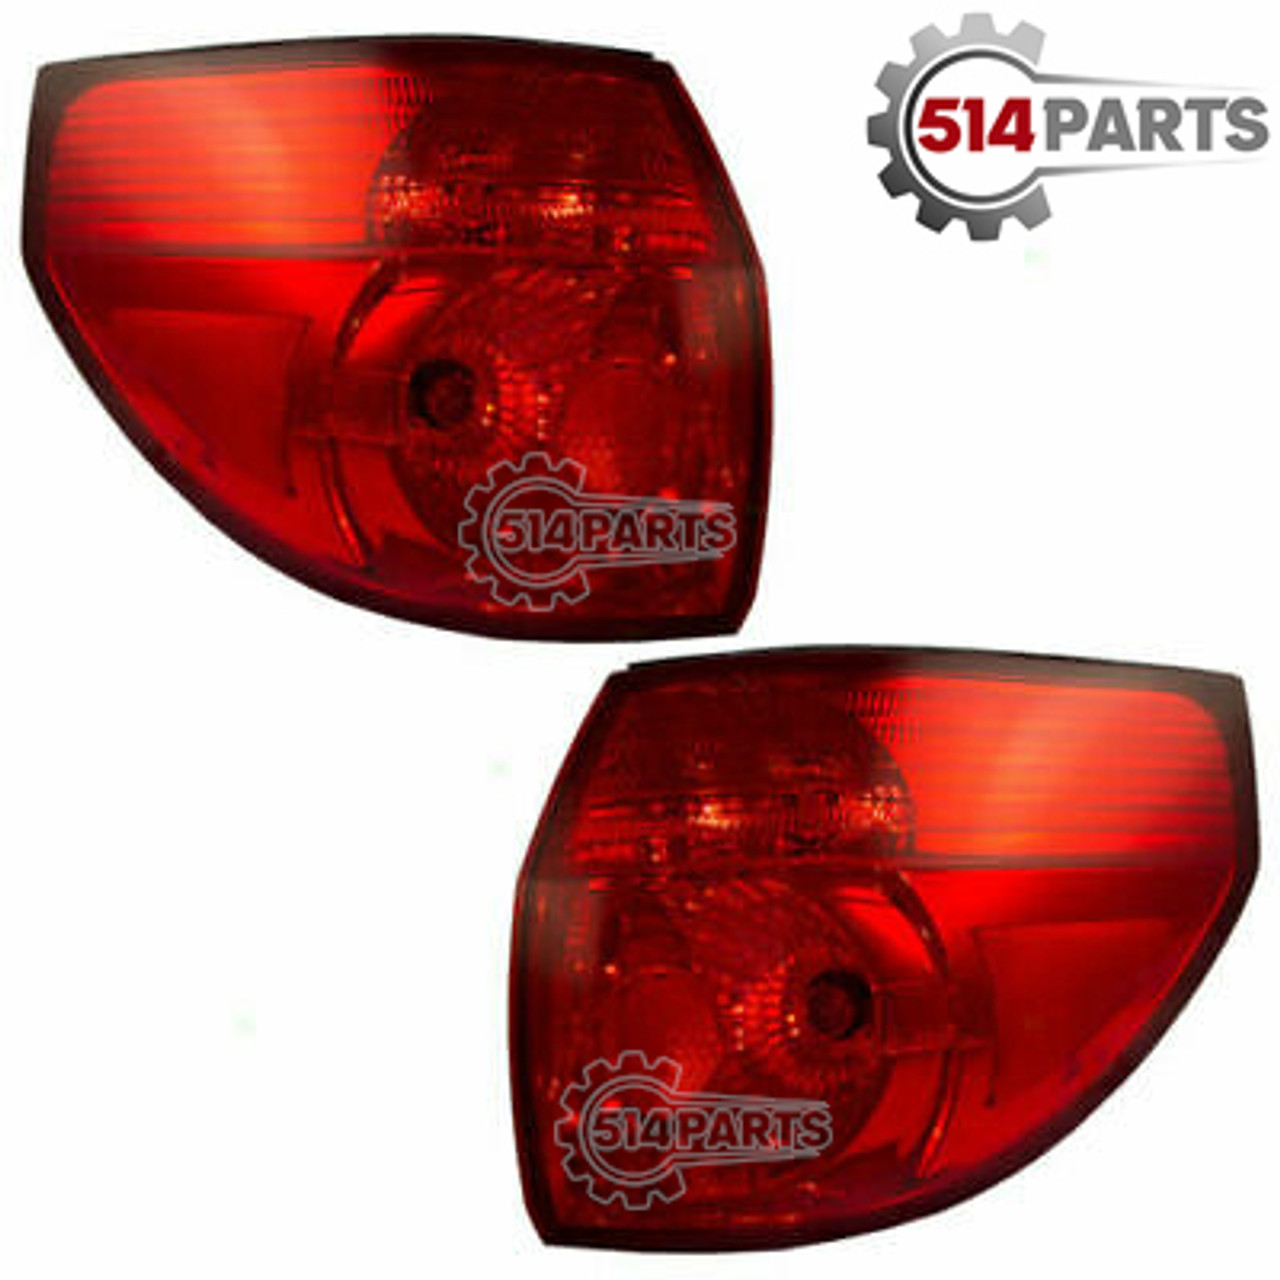 2006 - 2010 TOYOTA SIENNA TAIL LIGHTS High Quality - PHARES ARRIERE Haute Qualite